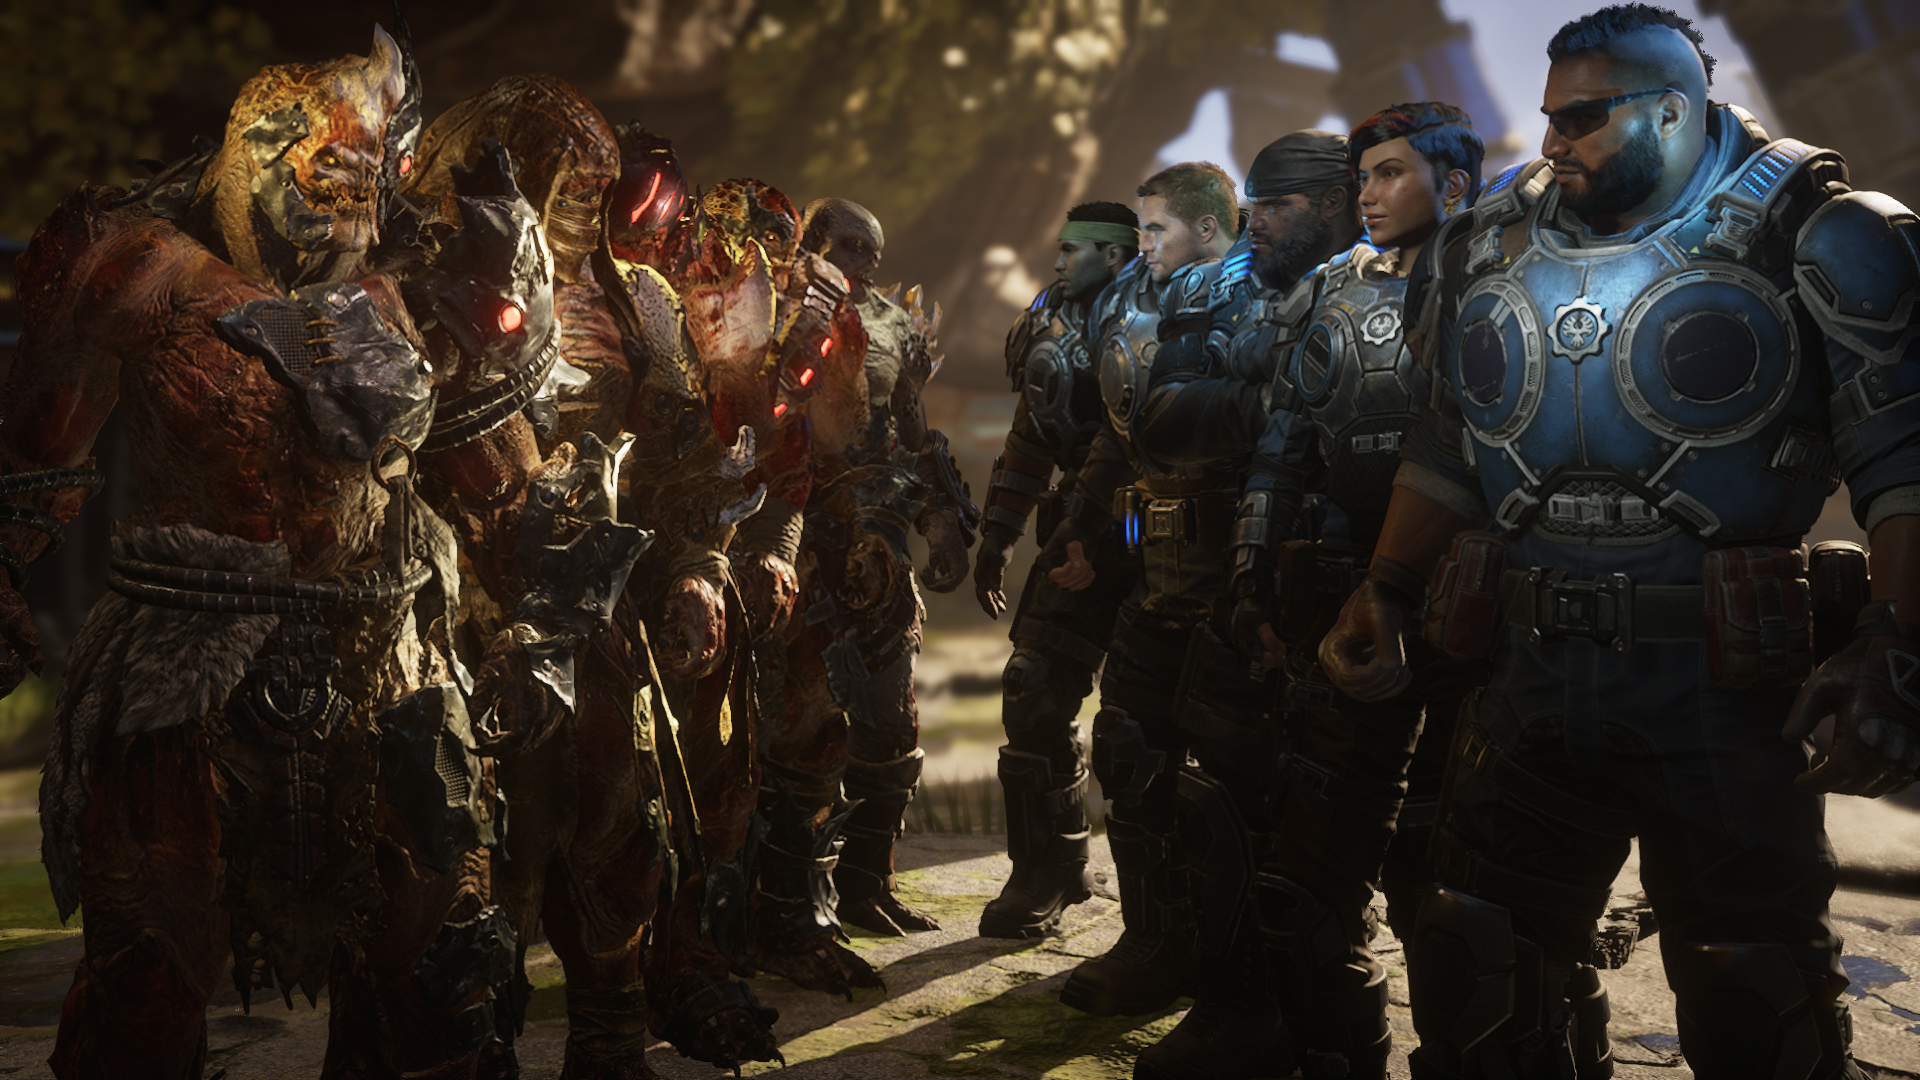 Gears 5's Horde mode revealed at Gamescom - Polygon